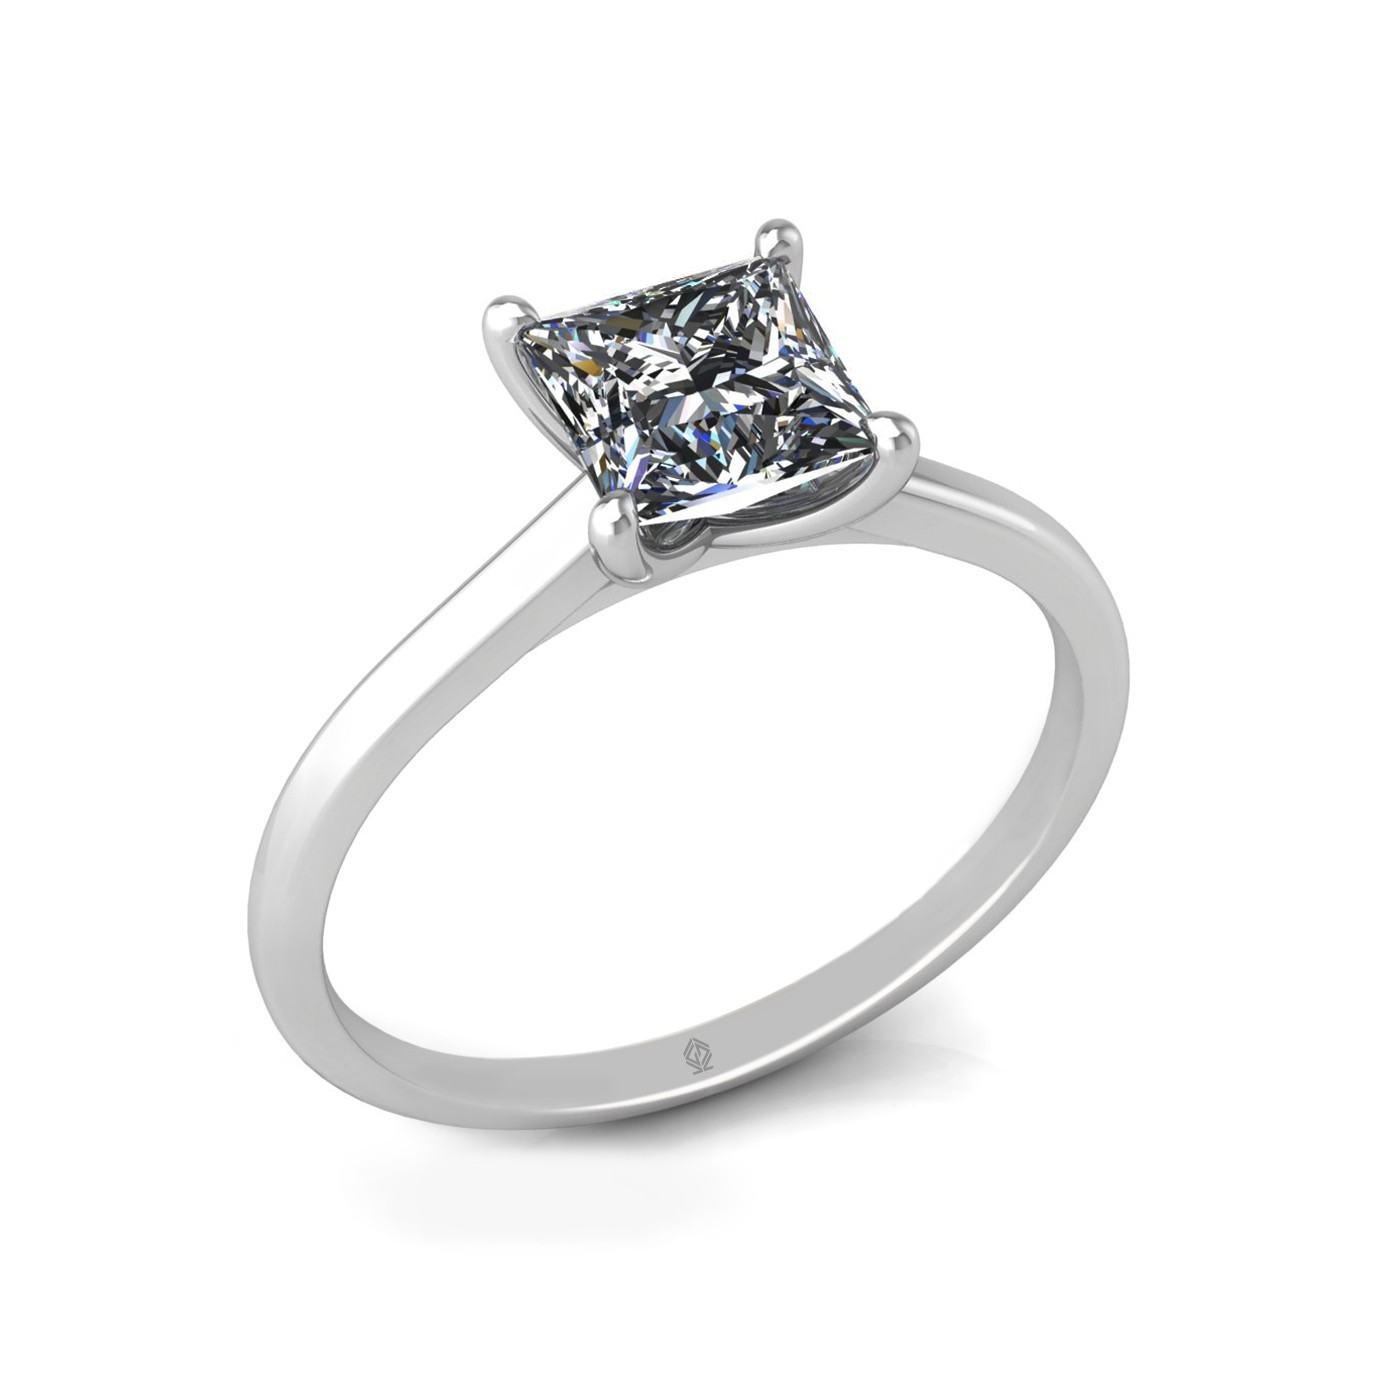 18K WHITE GOLD 4 PRONGS SOLITAIRE PRINCESS CUT DIAMOND ENGAGEMENT RING WITH WHISPER THIN BAND